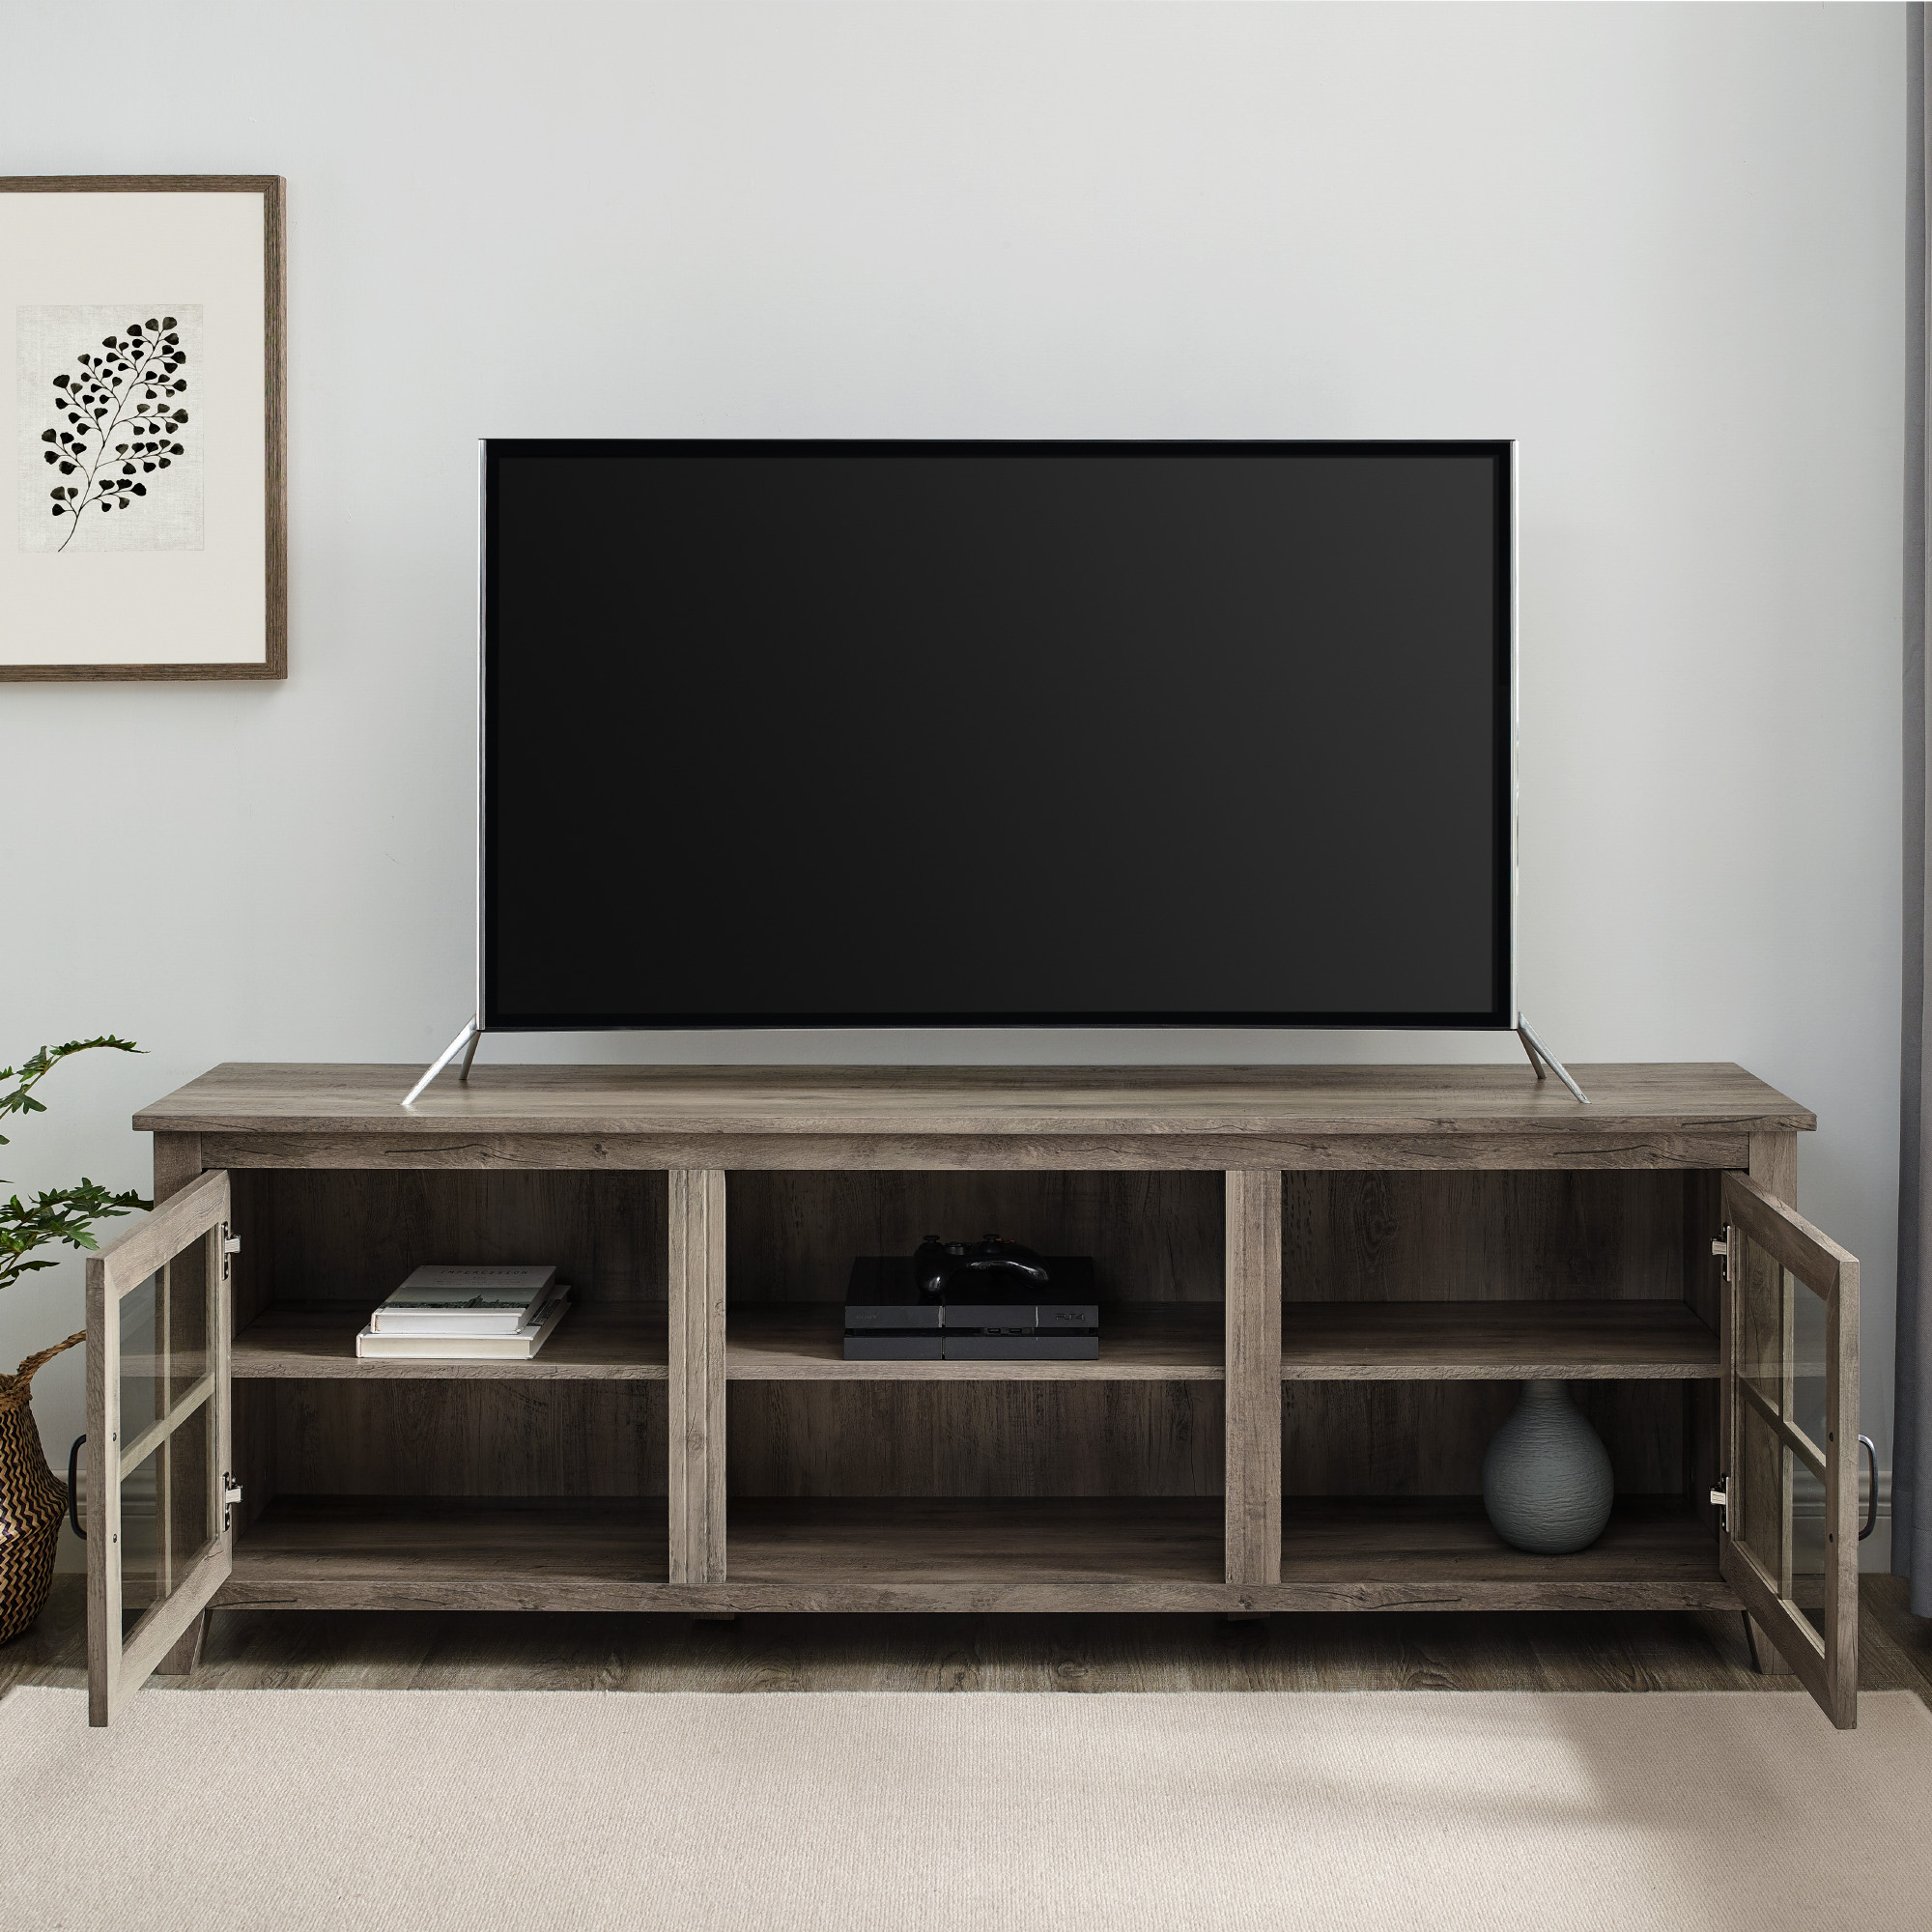 Walker Edison Modern Farmhouse TV Stand for TVs up to 80", Grey Wash - image 4 of 14